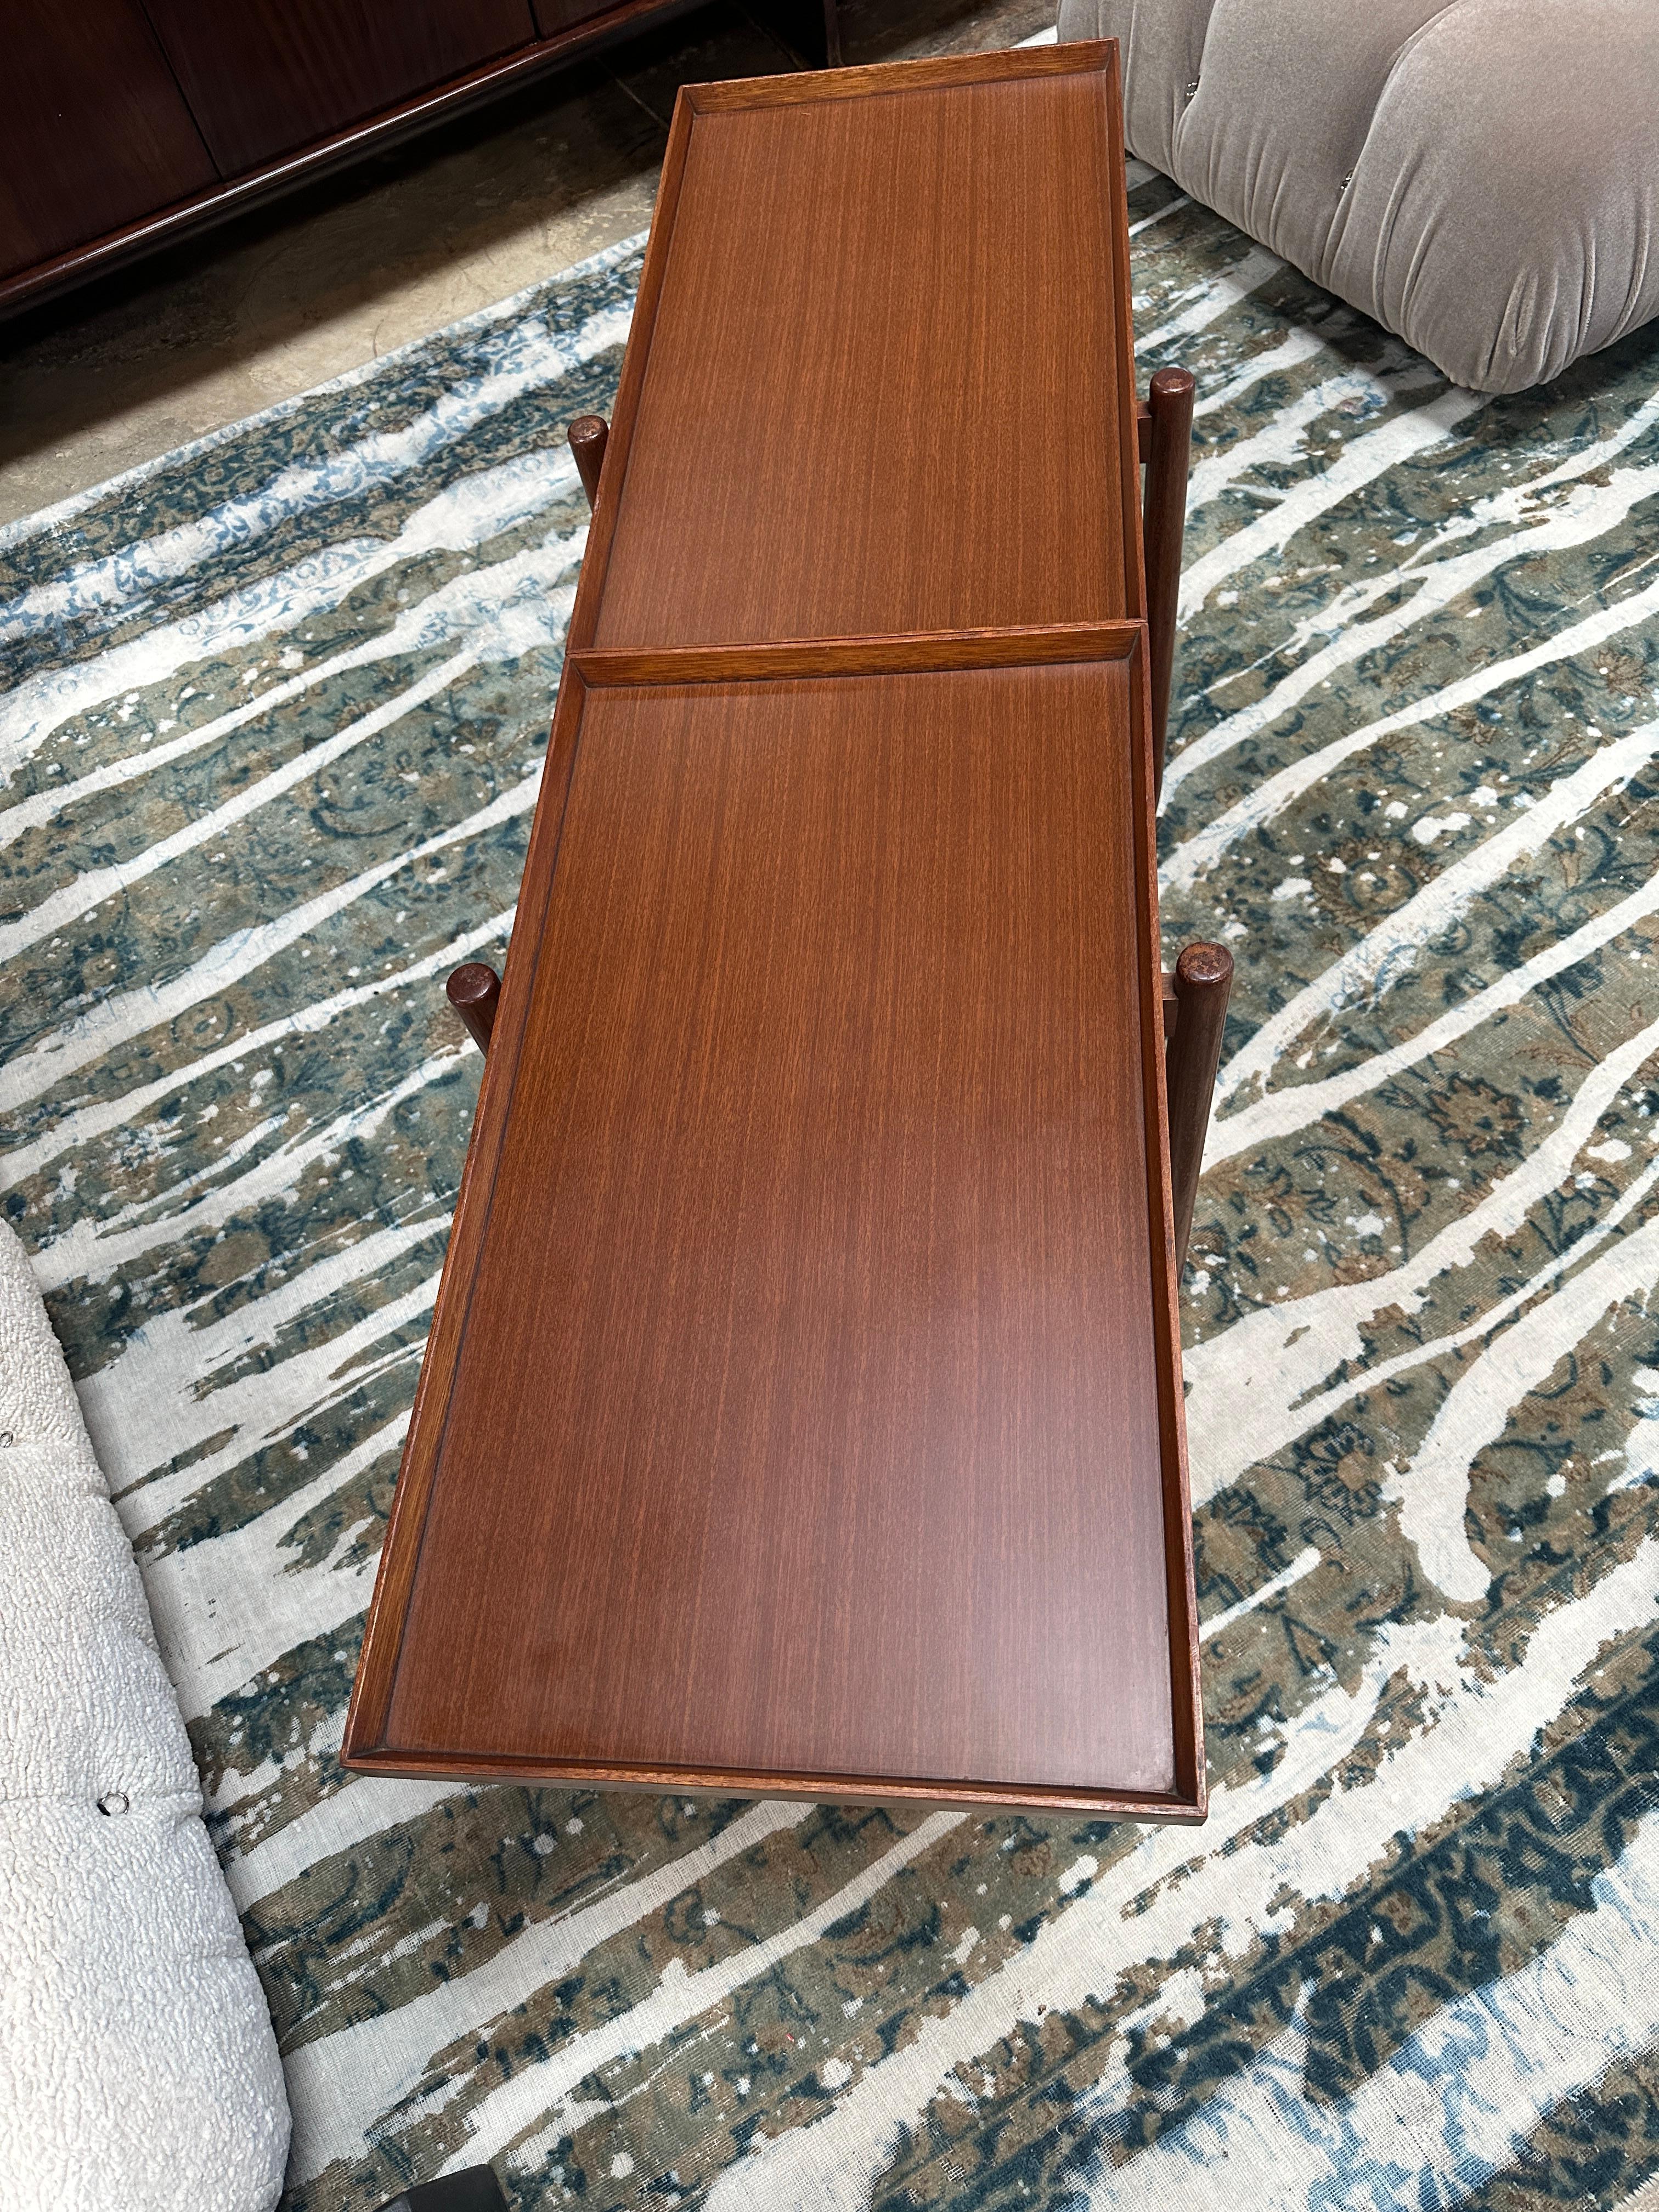 Mid Century expandable walnut coffee table made in Italy in 1980s.
Nothing touches, nothing clashes, which gives this piece of furniture a completely peaceful yet strong expression. A piece like this will stand the test of time.